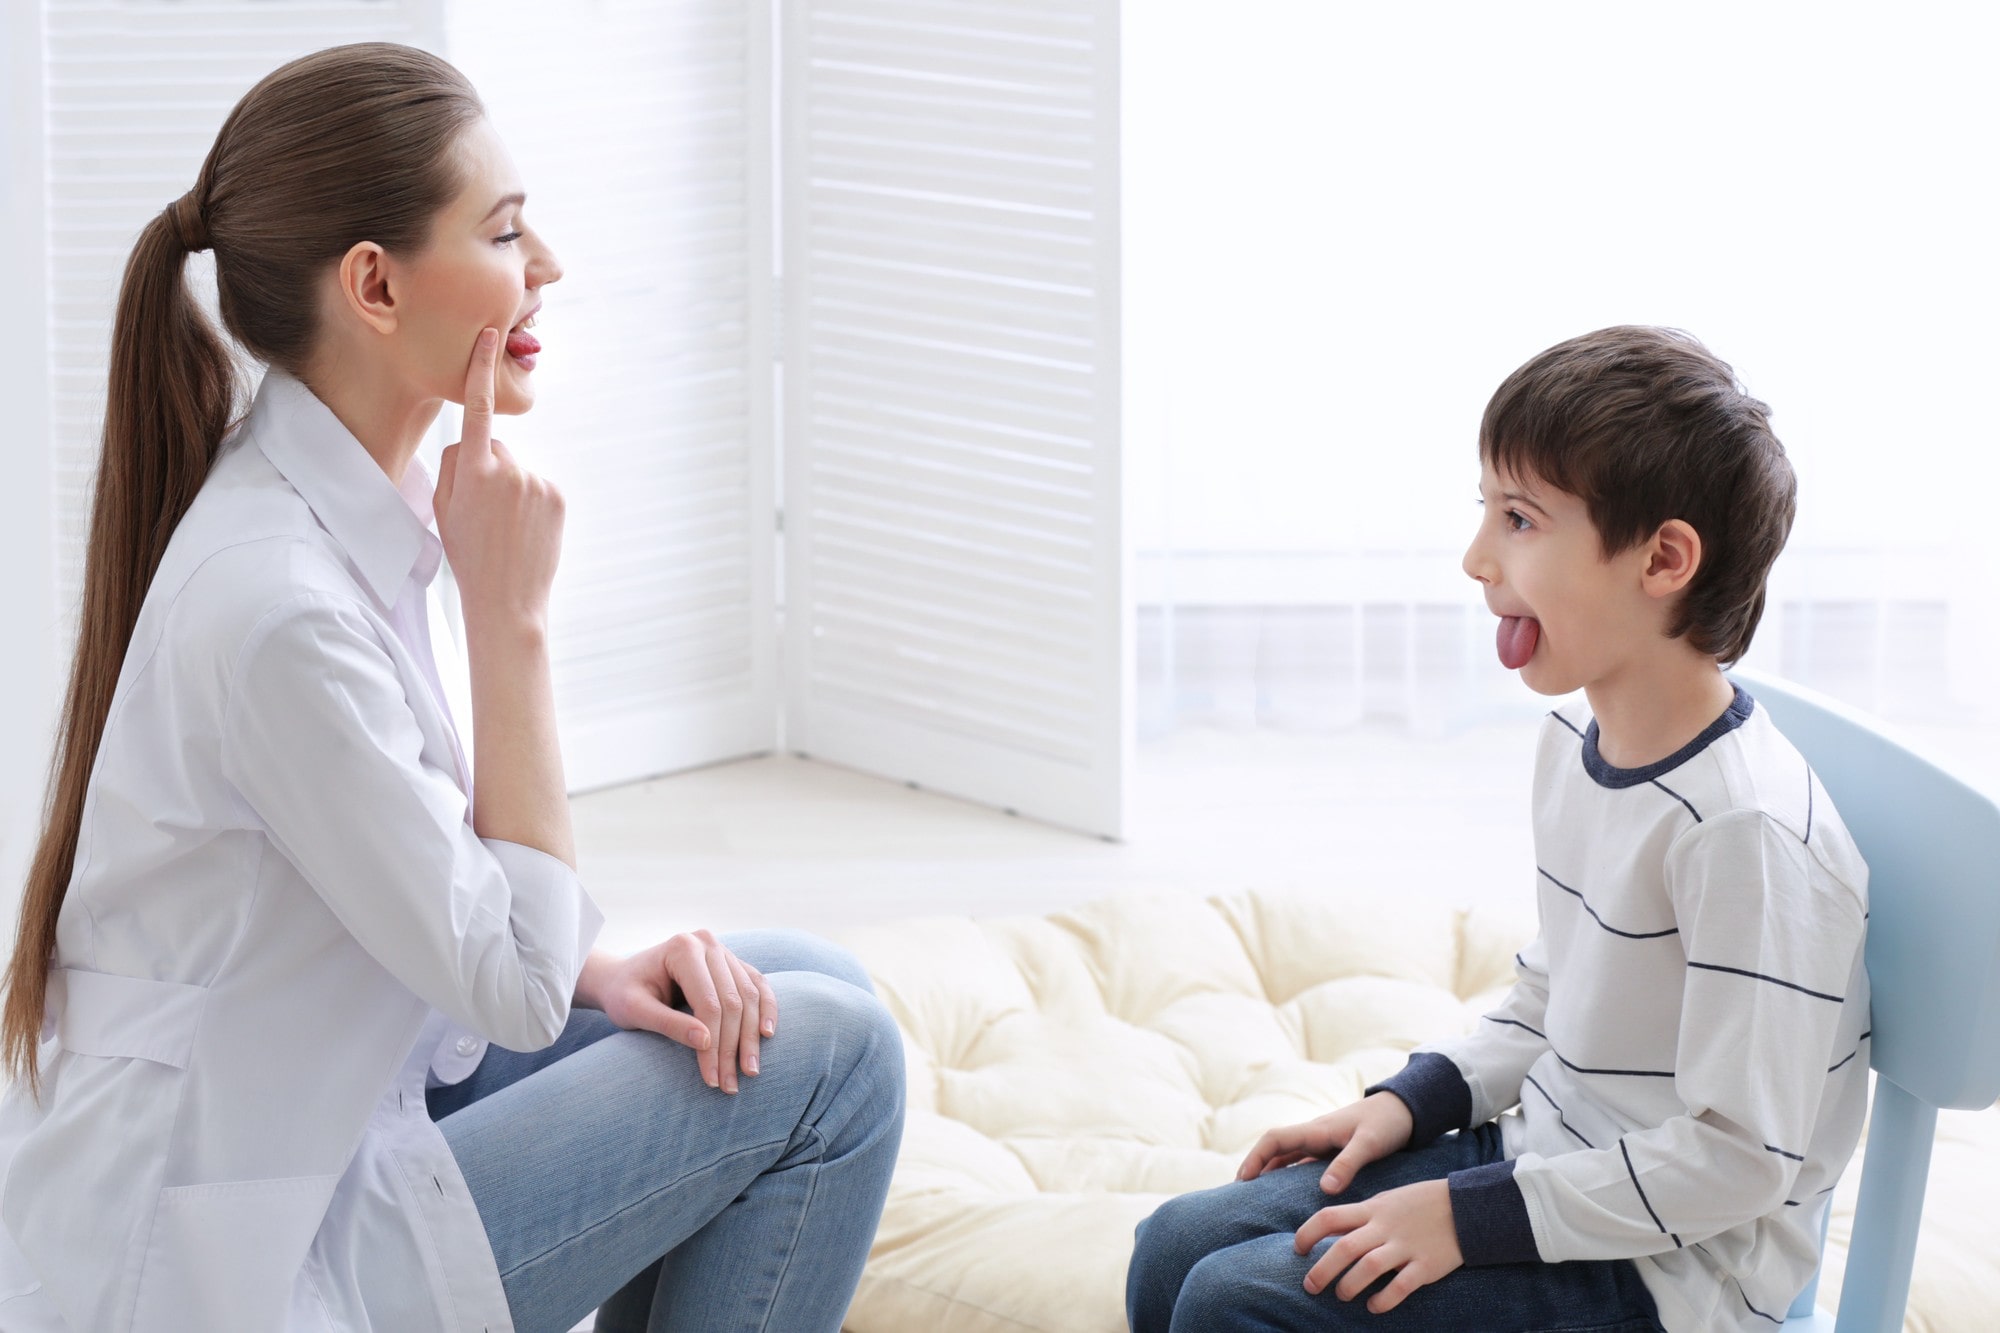 Speech Therapist Giving Therapy to a Child